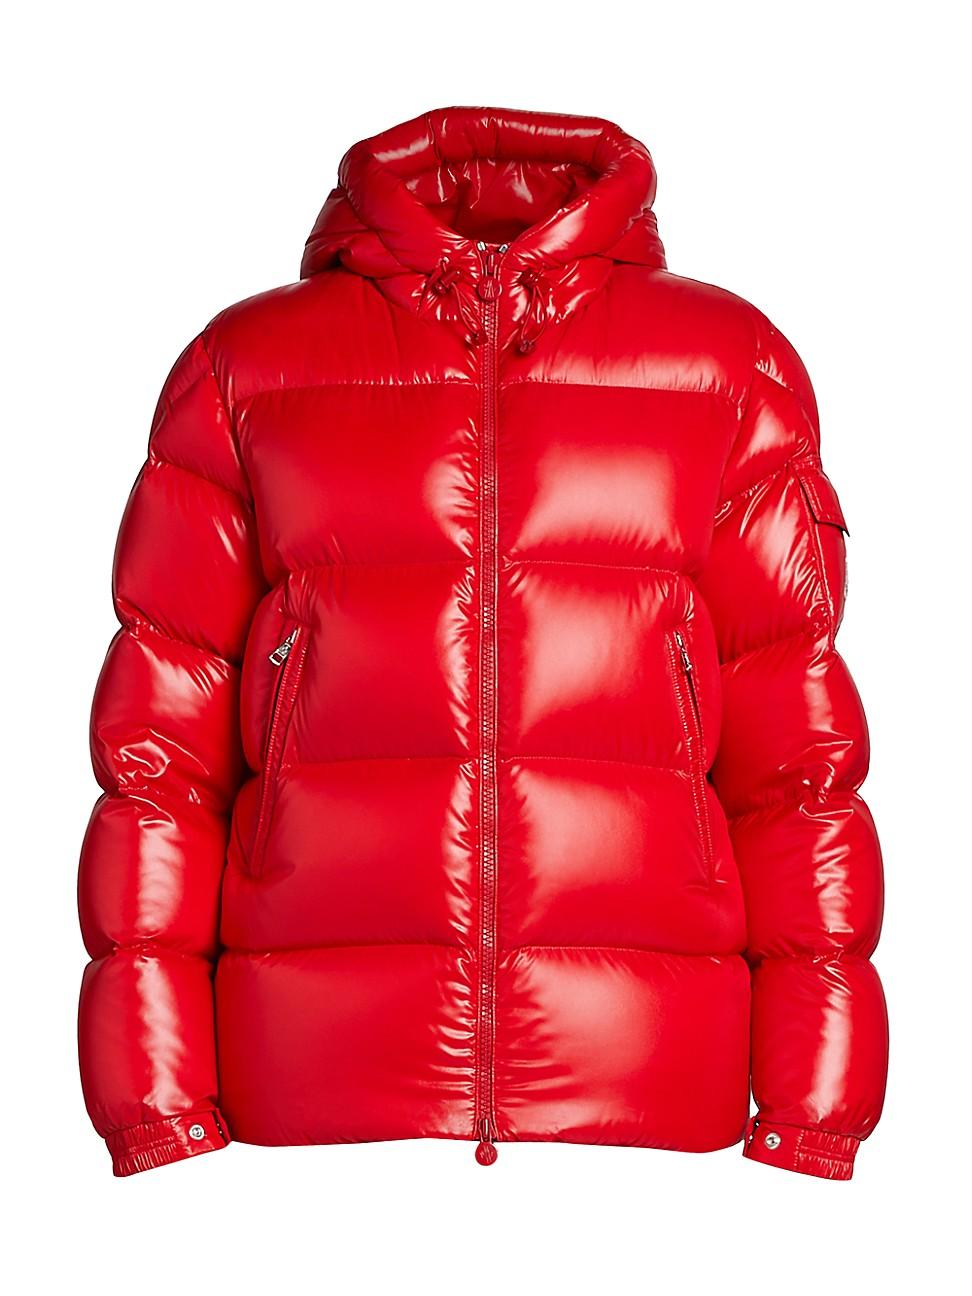 moncler red puffer, Off 79%, www.scrimaglio.com